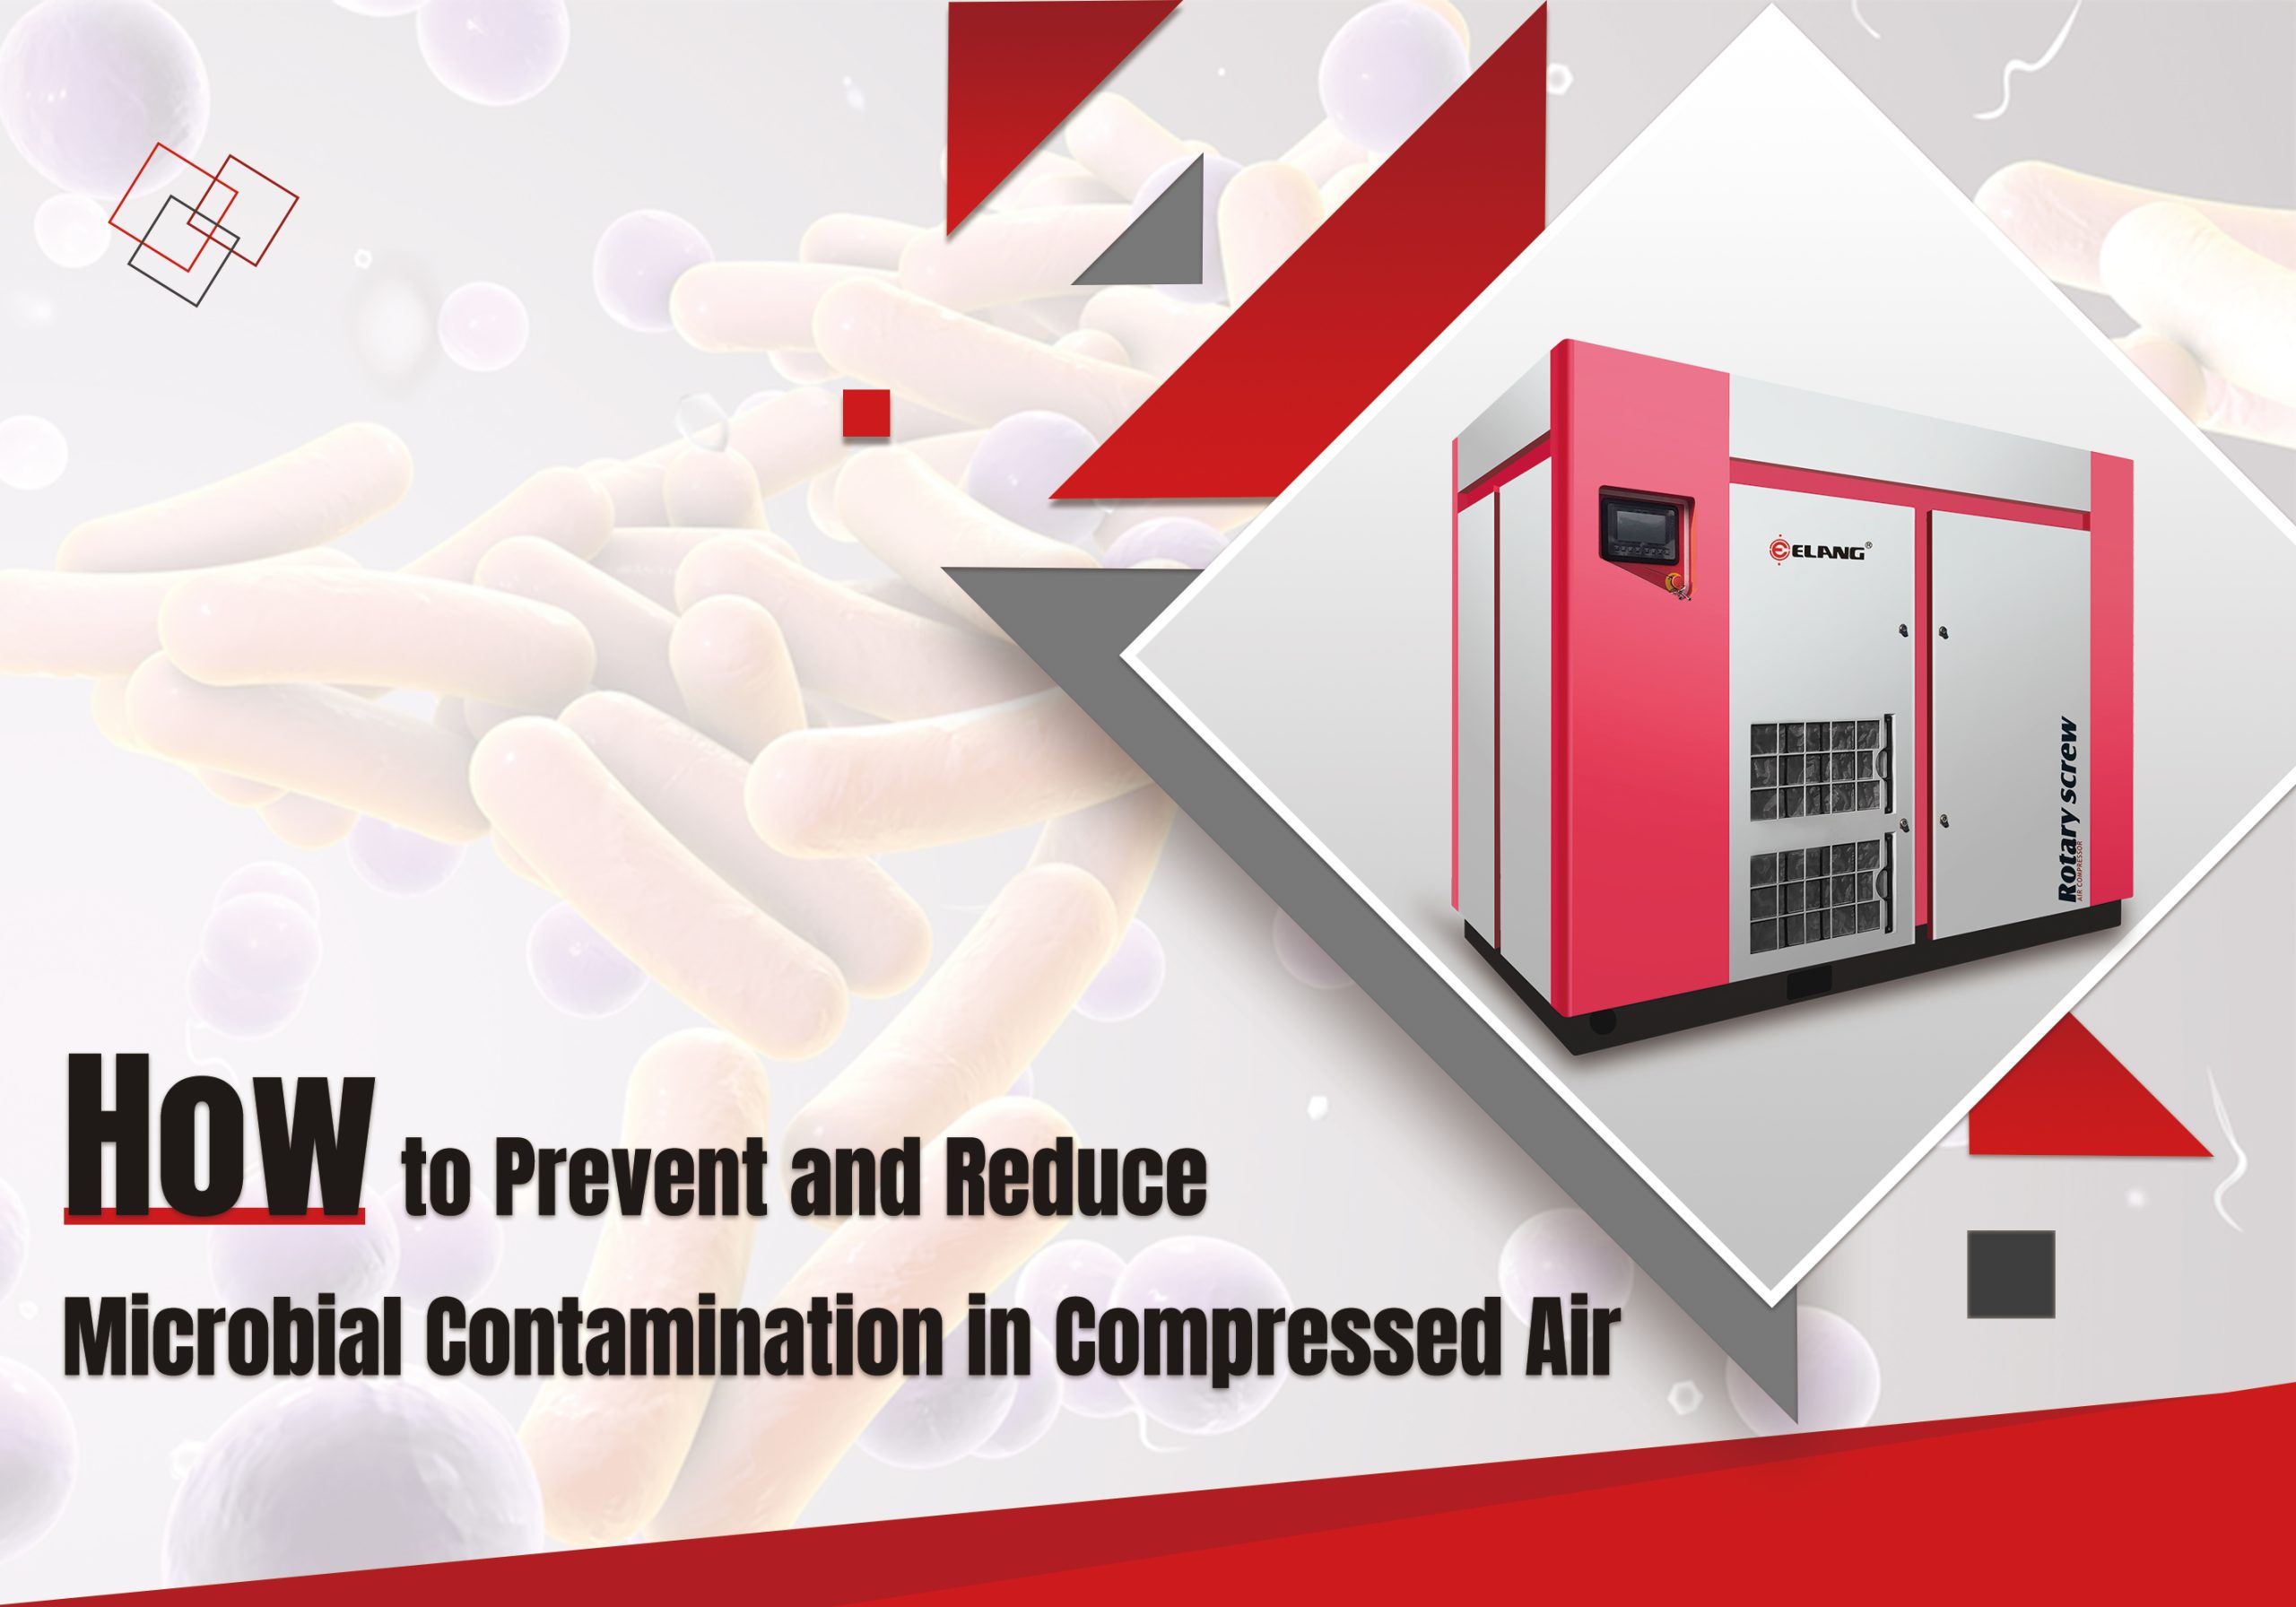 How to Prevent and Reduce Microbial Contamination in Compressed Air